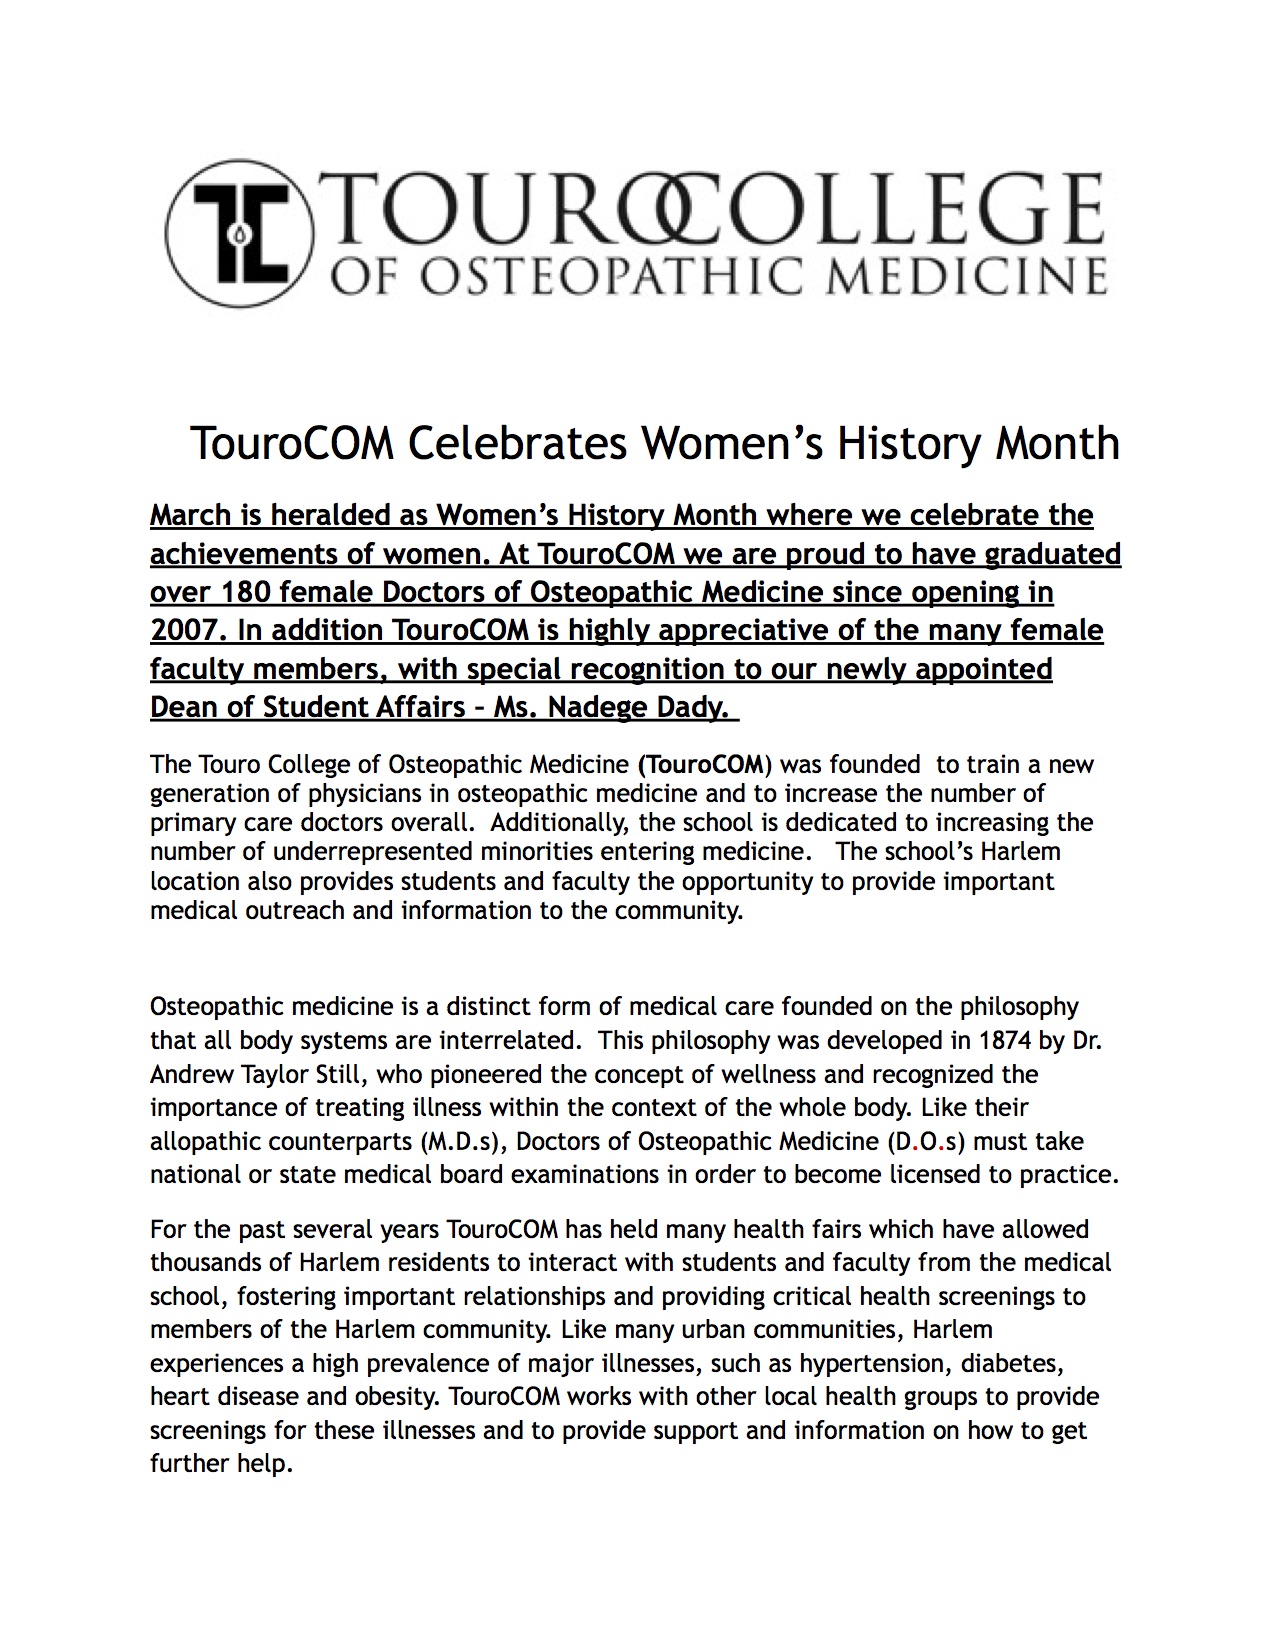 Women's History Month - Advertorial (4)